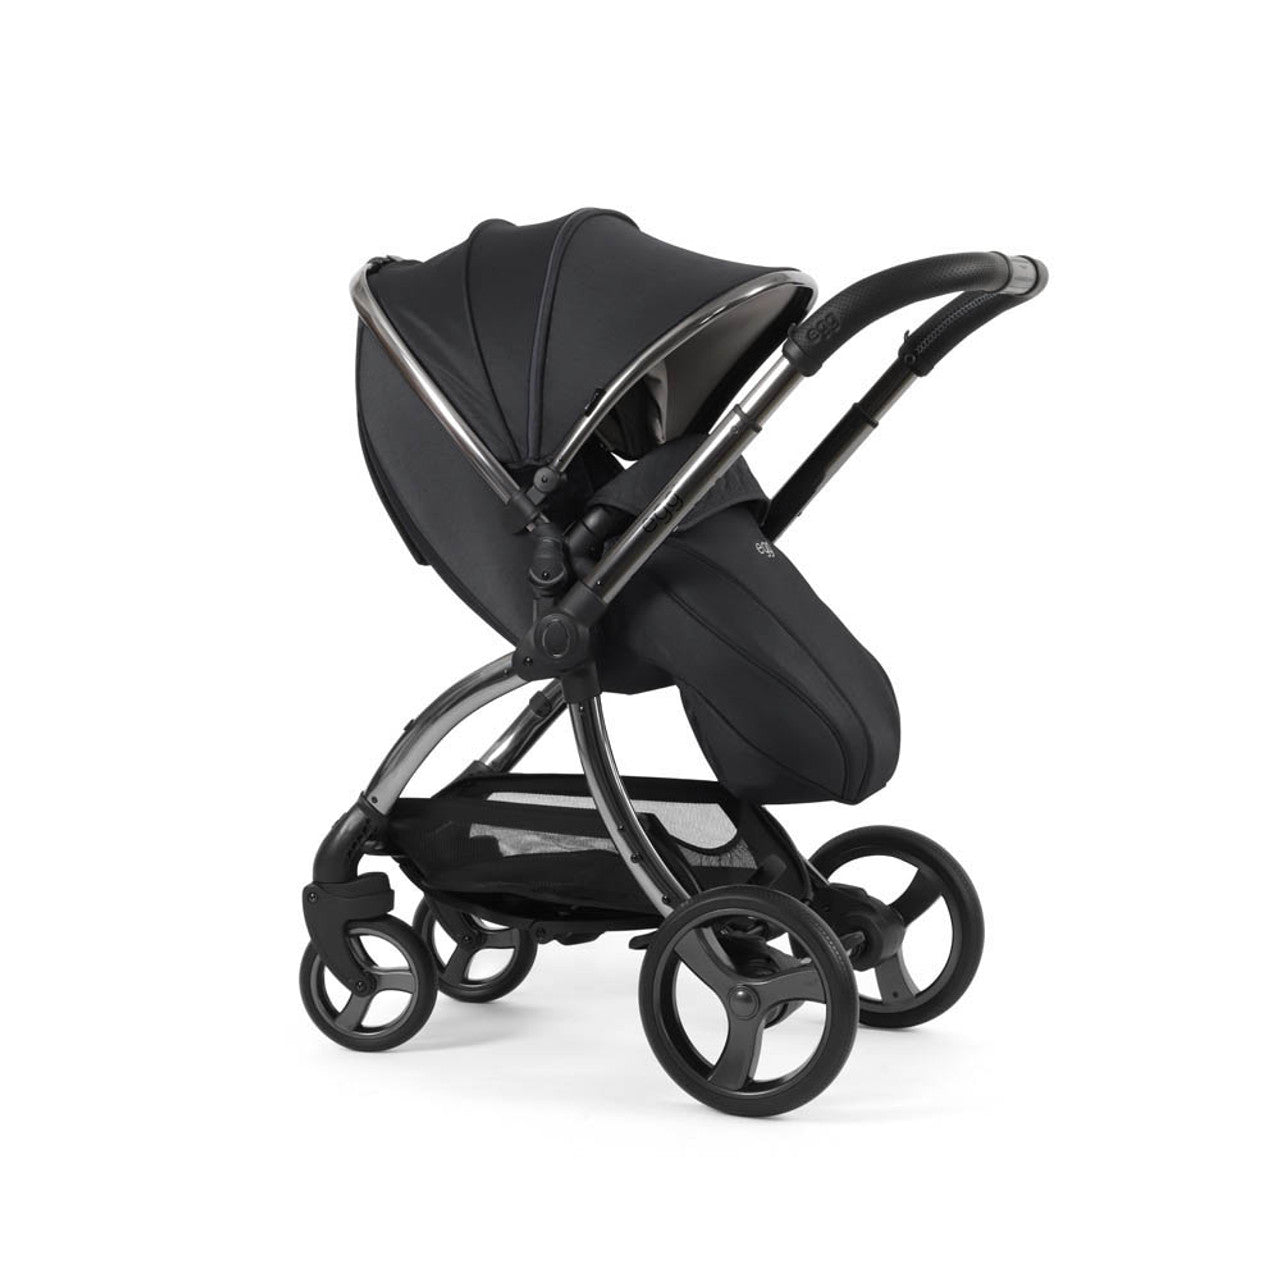 Egg® 3 Pushchair + Carrycot 2 in 1 Pram - Carbonite -  | For Your Little One